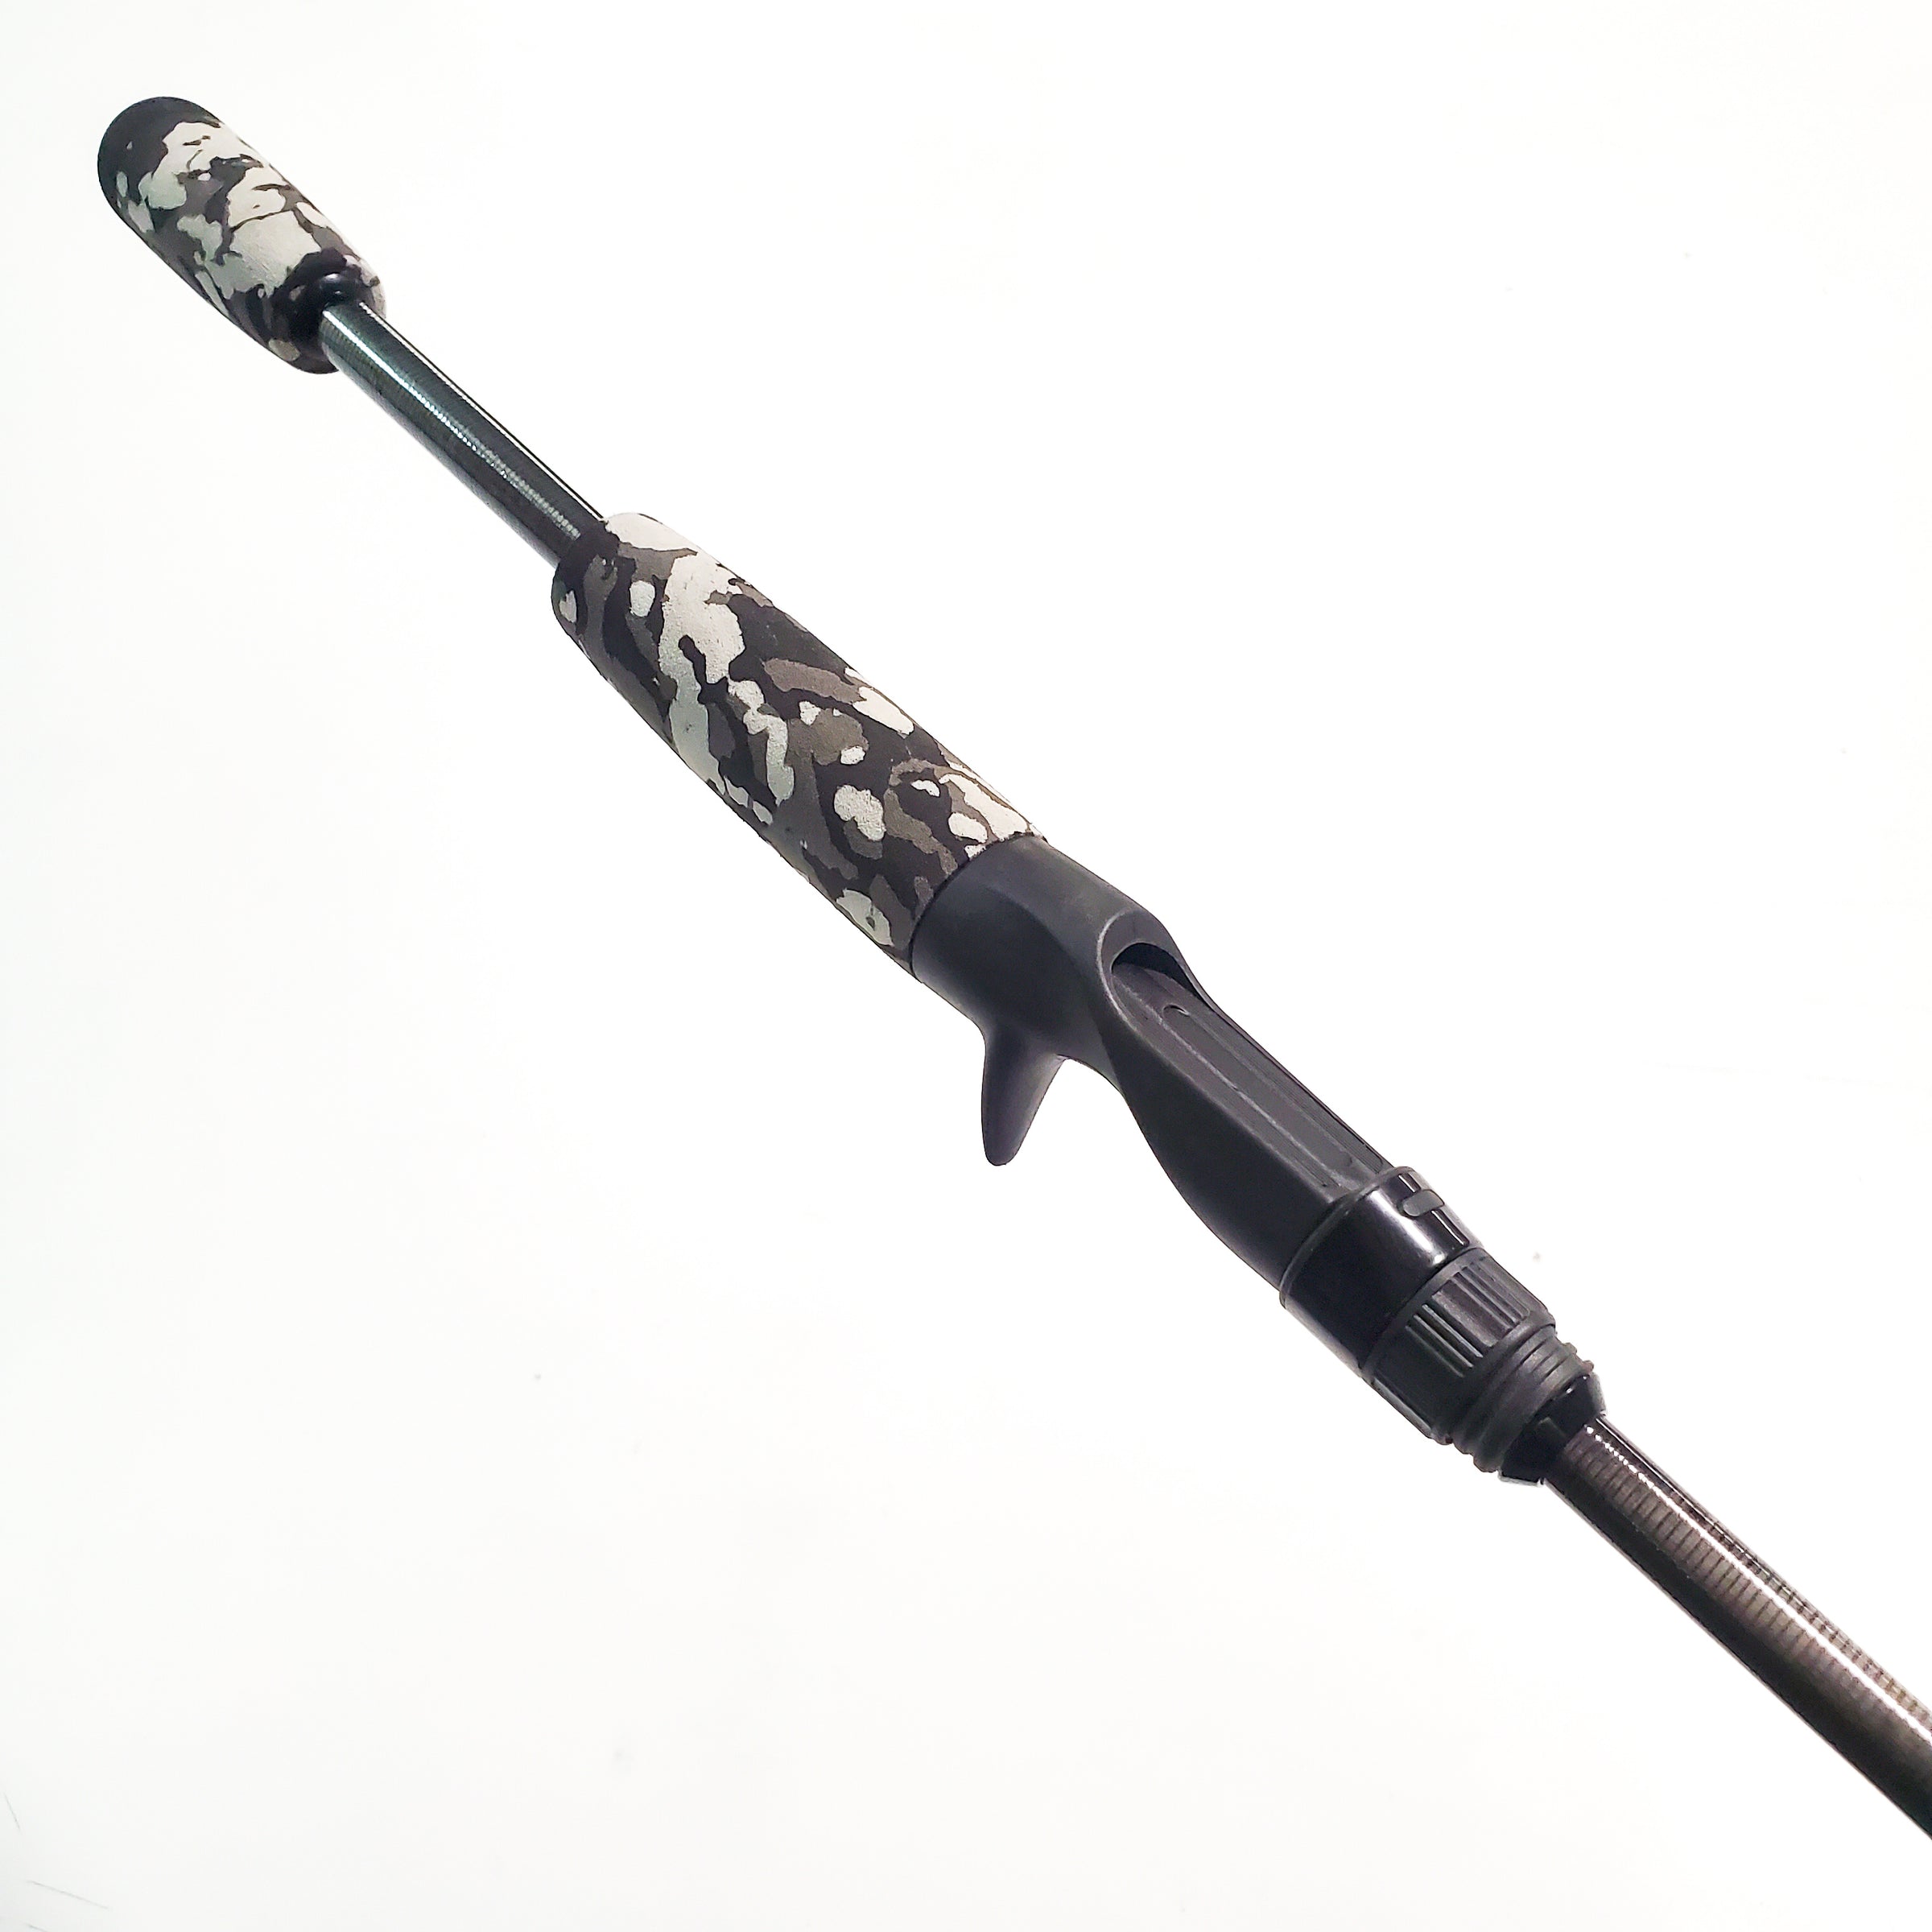 Green CAMO EVA Spinning Fishing Rod Handle Grip Part And 16# IPS